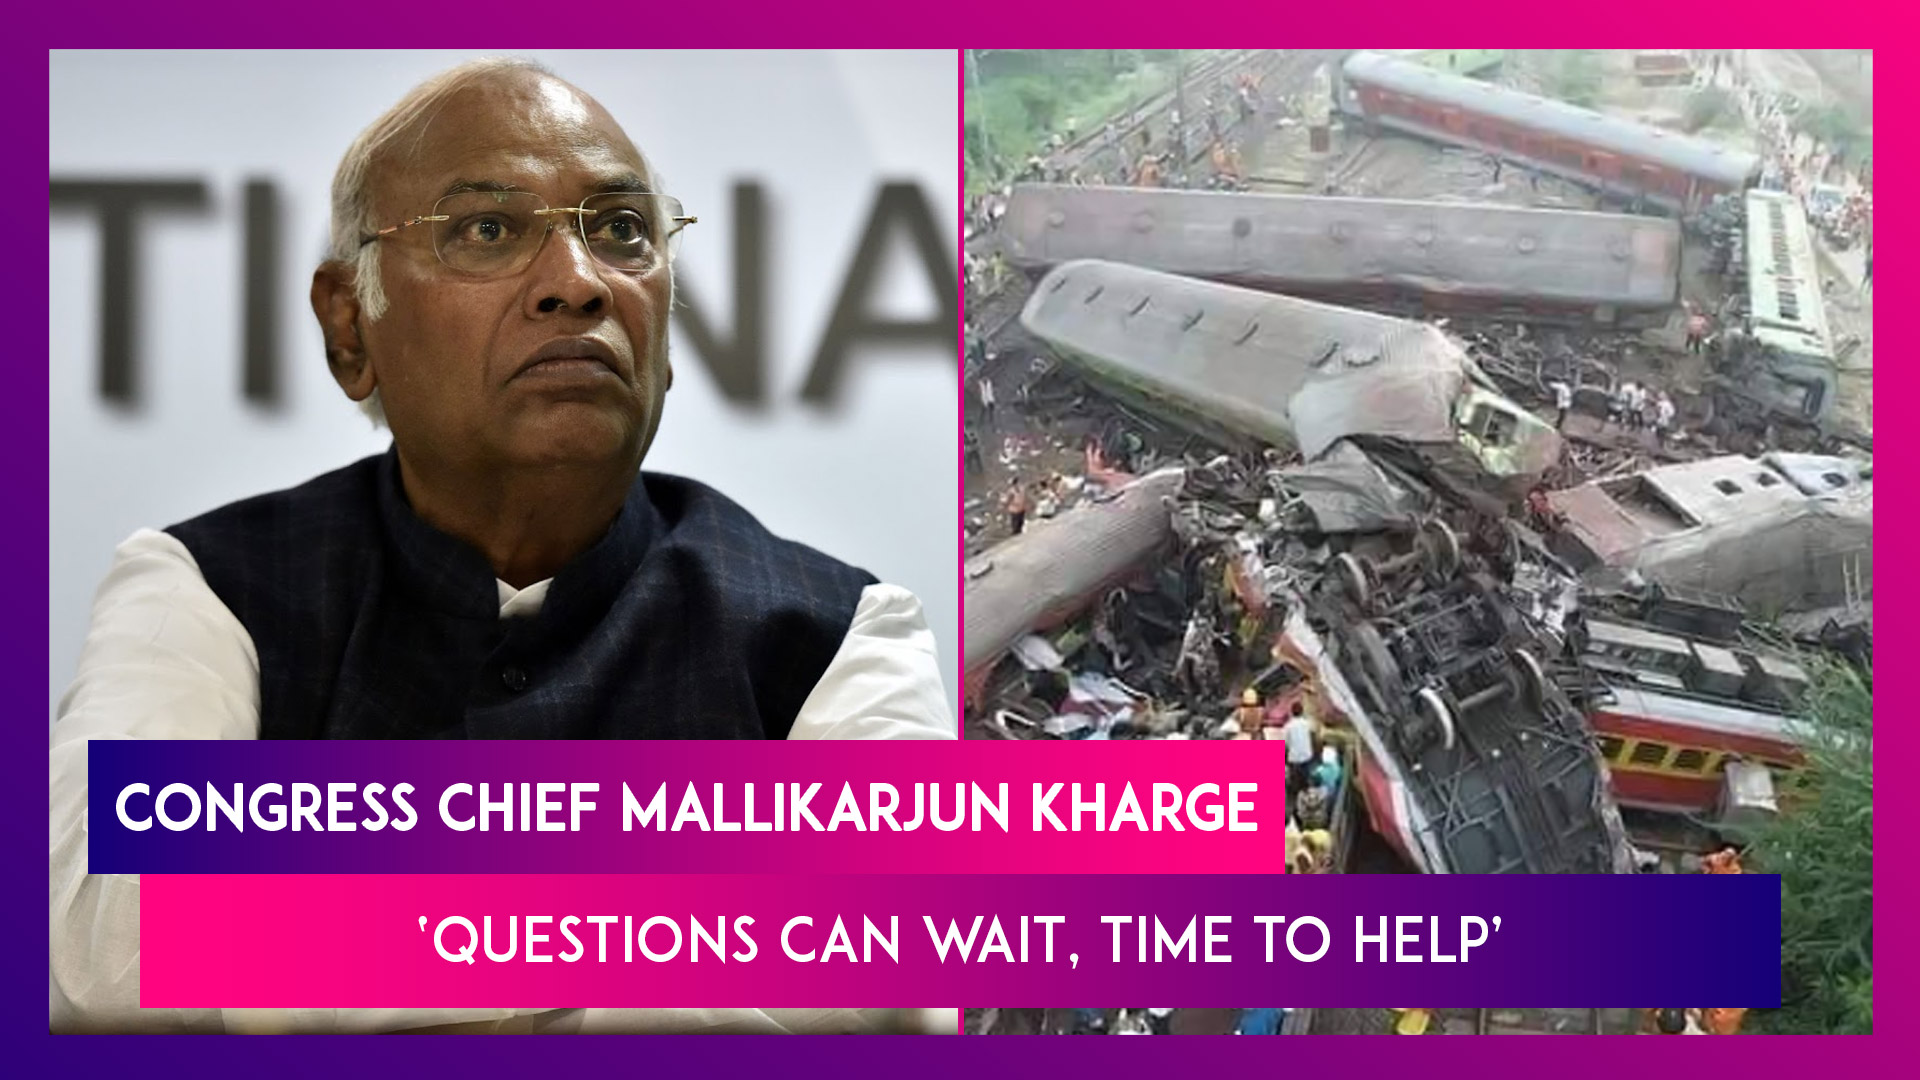 Balasore Train Tragedy: Congress Chief Mallikarjun Kharge Says Questions Can Wait, Time To Help In Relief Operation